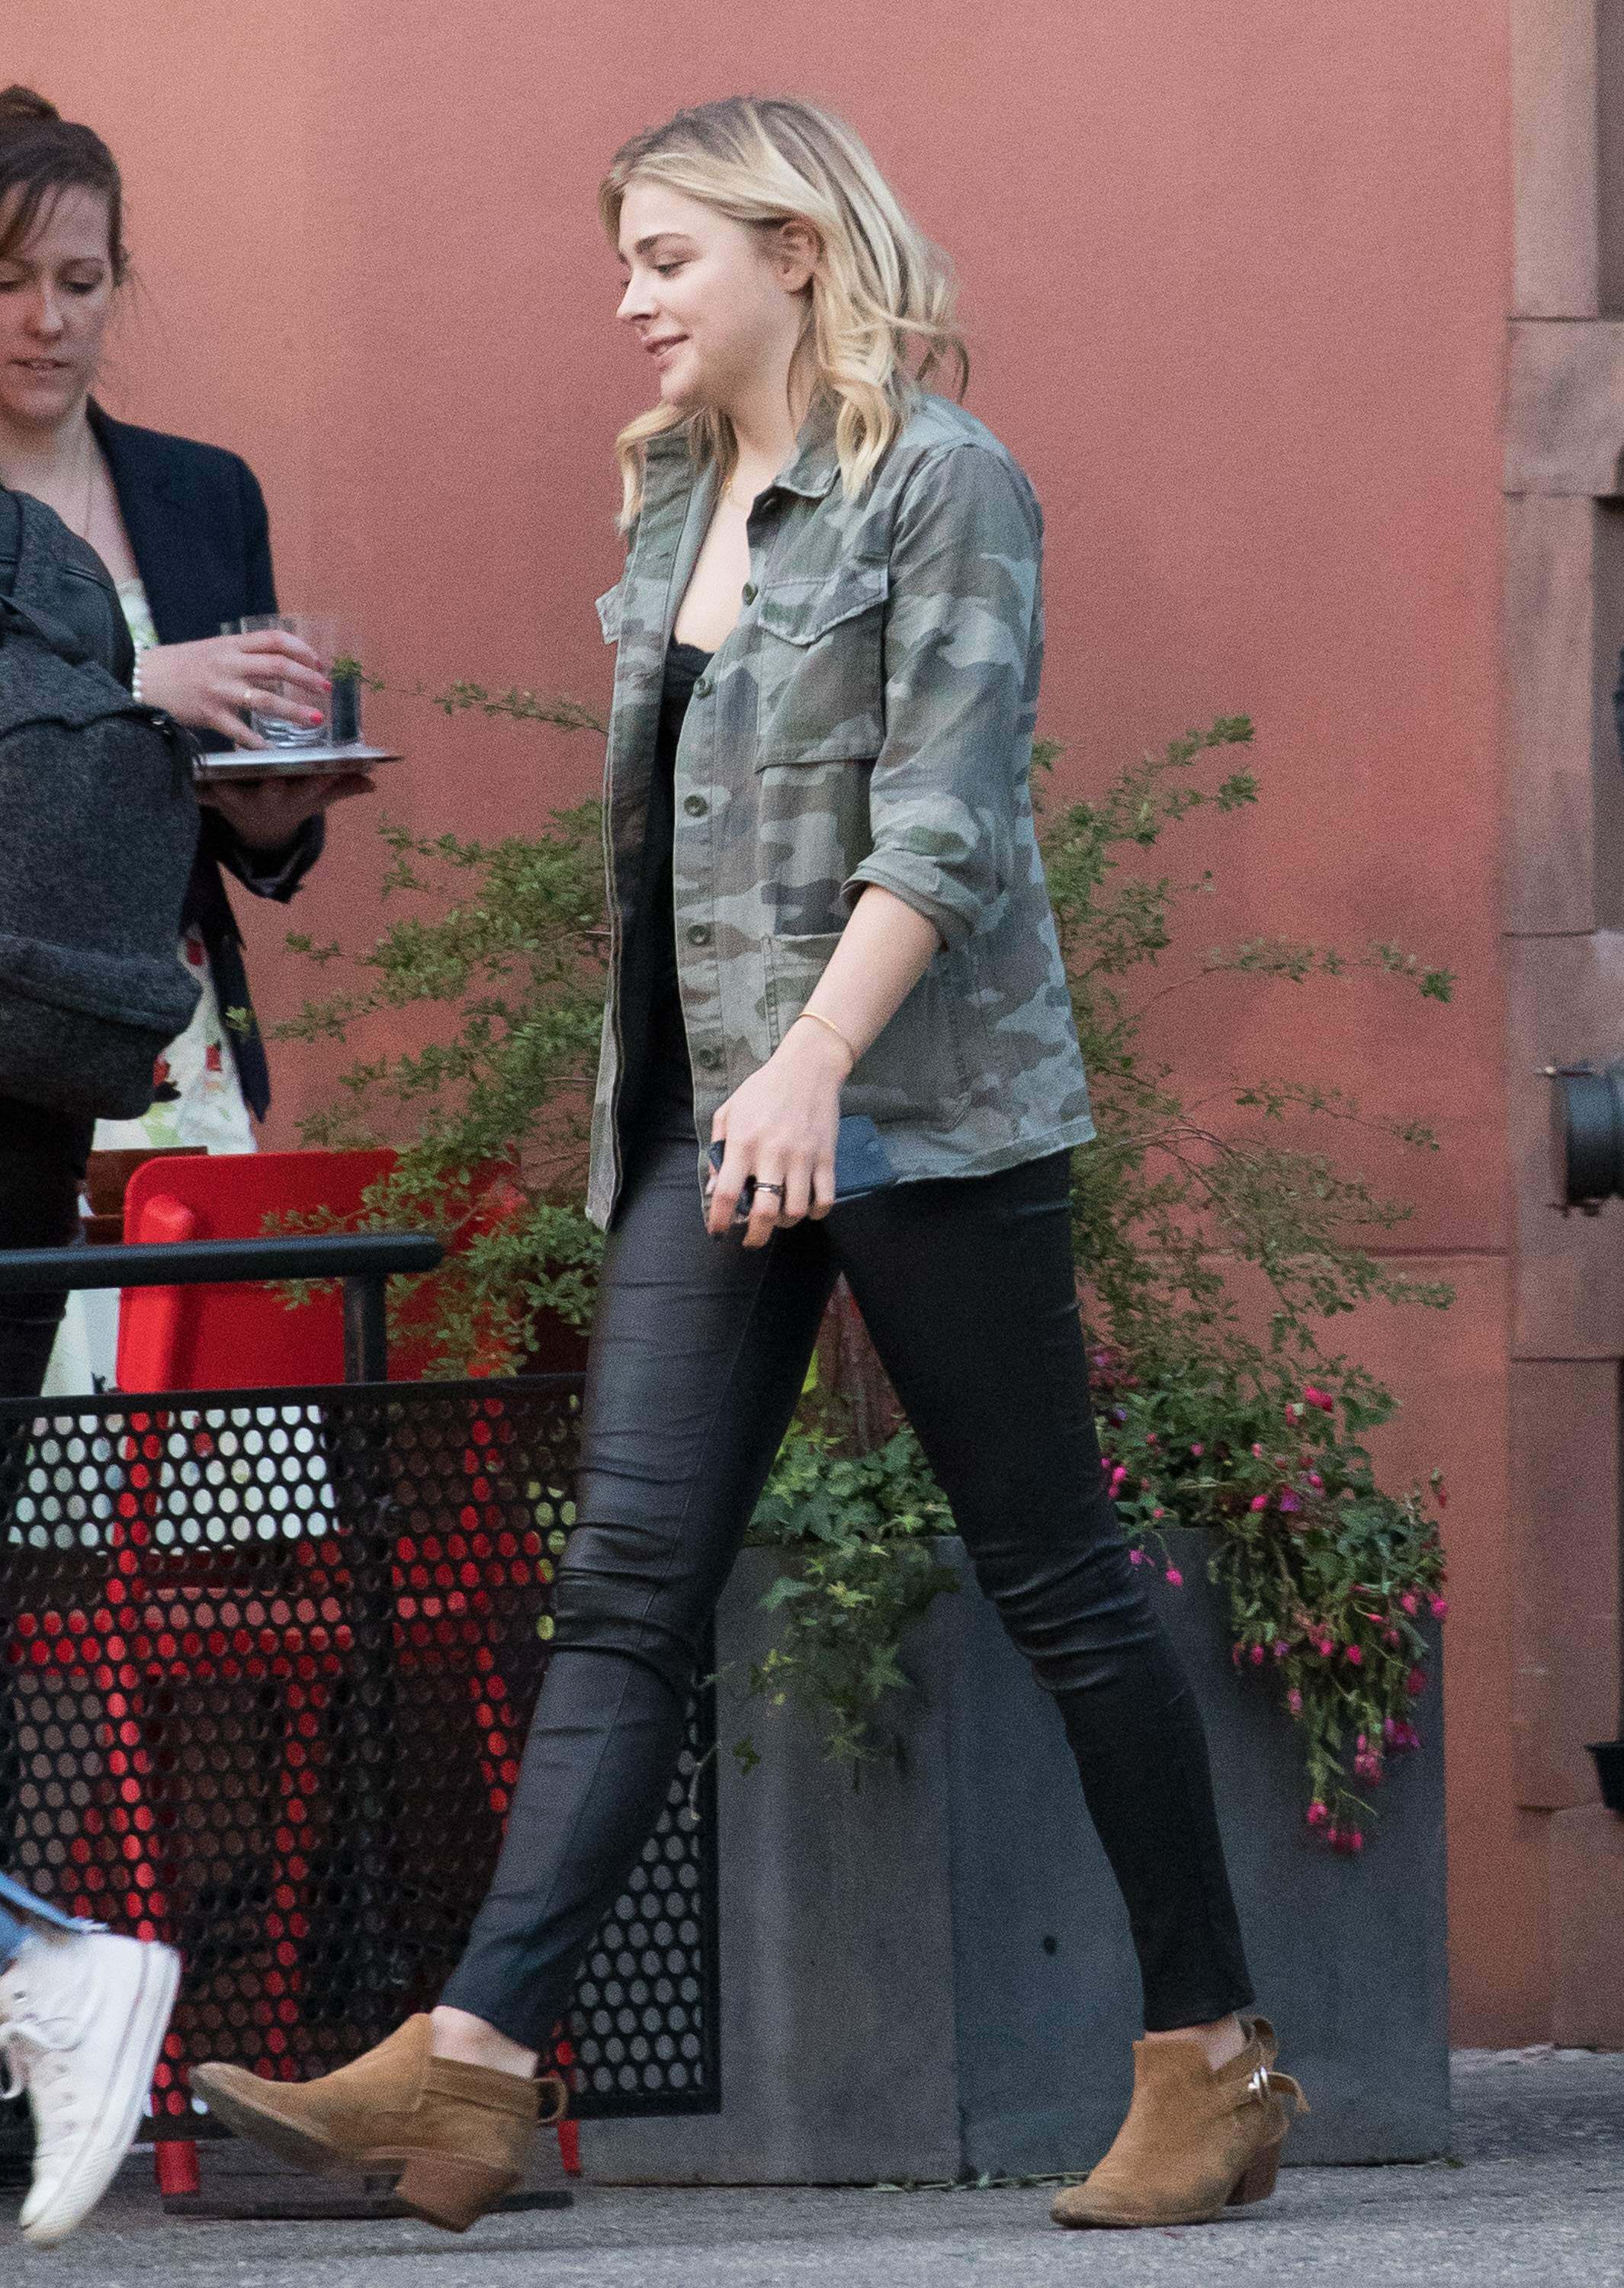 Chloe Moretz out and about in SoHo